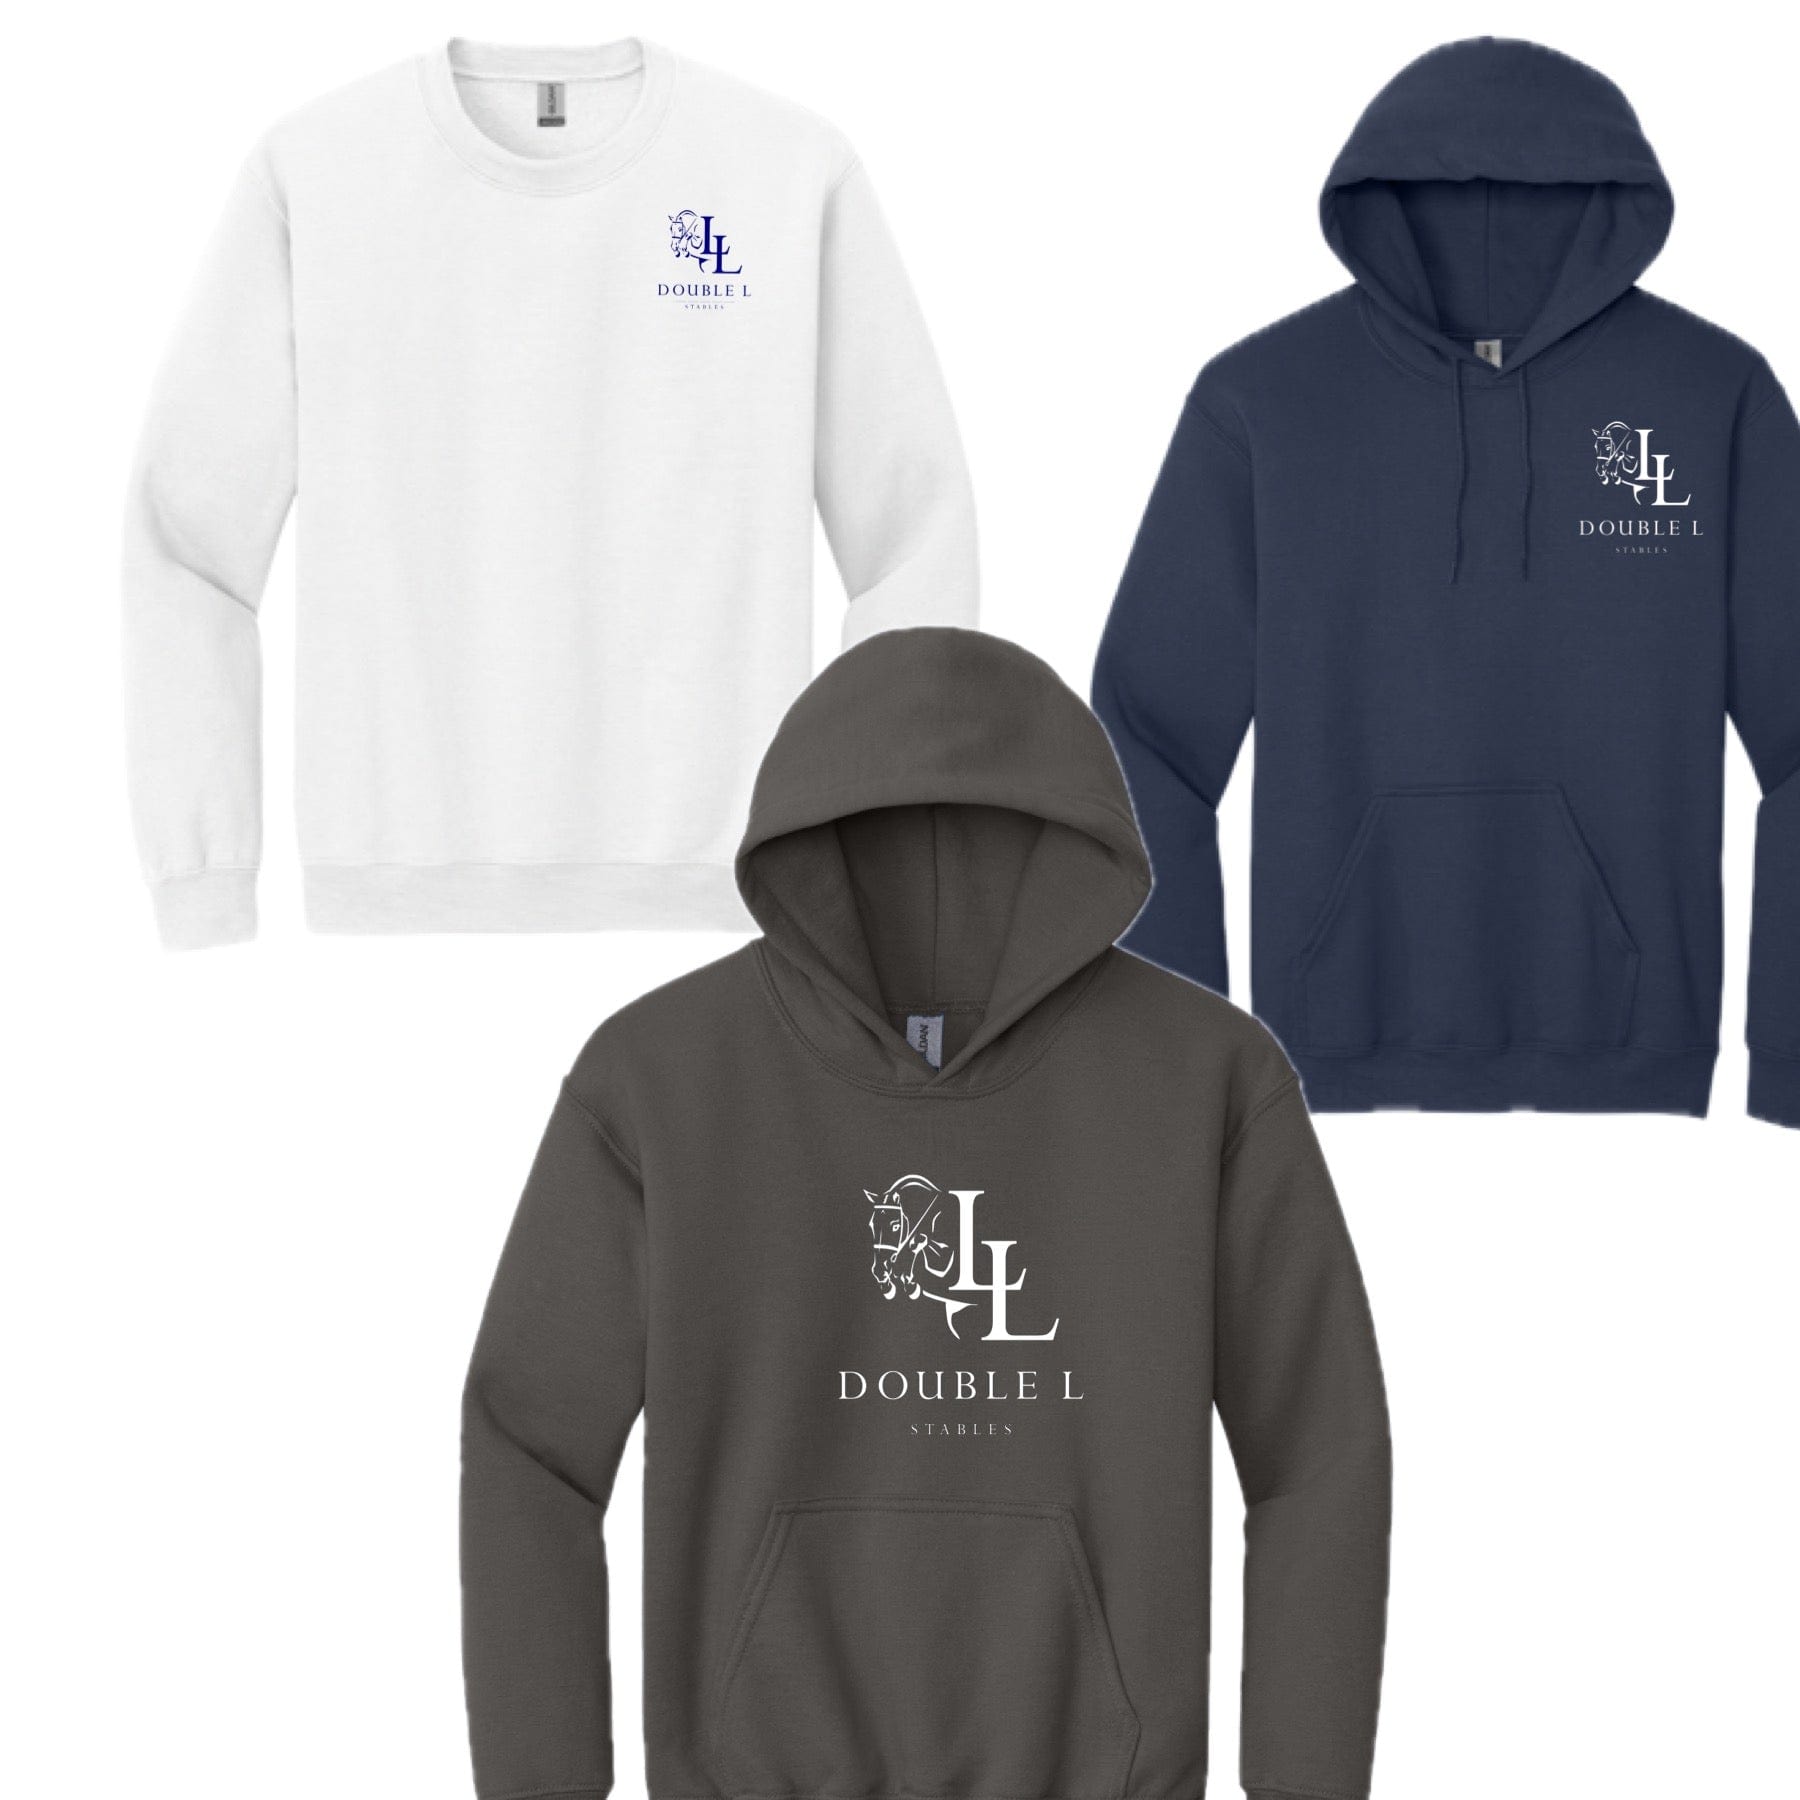 Equestrian Team Apparel Double L Stables Youth Hoodies equestrian team apparel online tack store mobile tack store custom farm apparel custom show stable clothing equestrian lifestyle horse show clothing riding clothes horses equestrian tack store